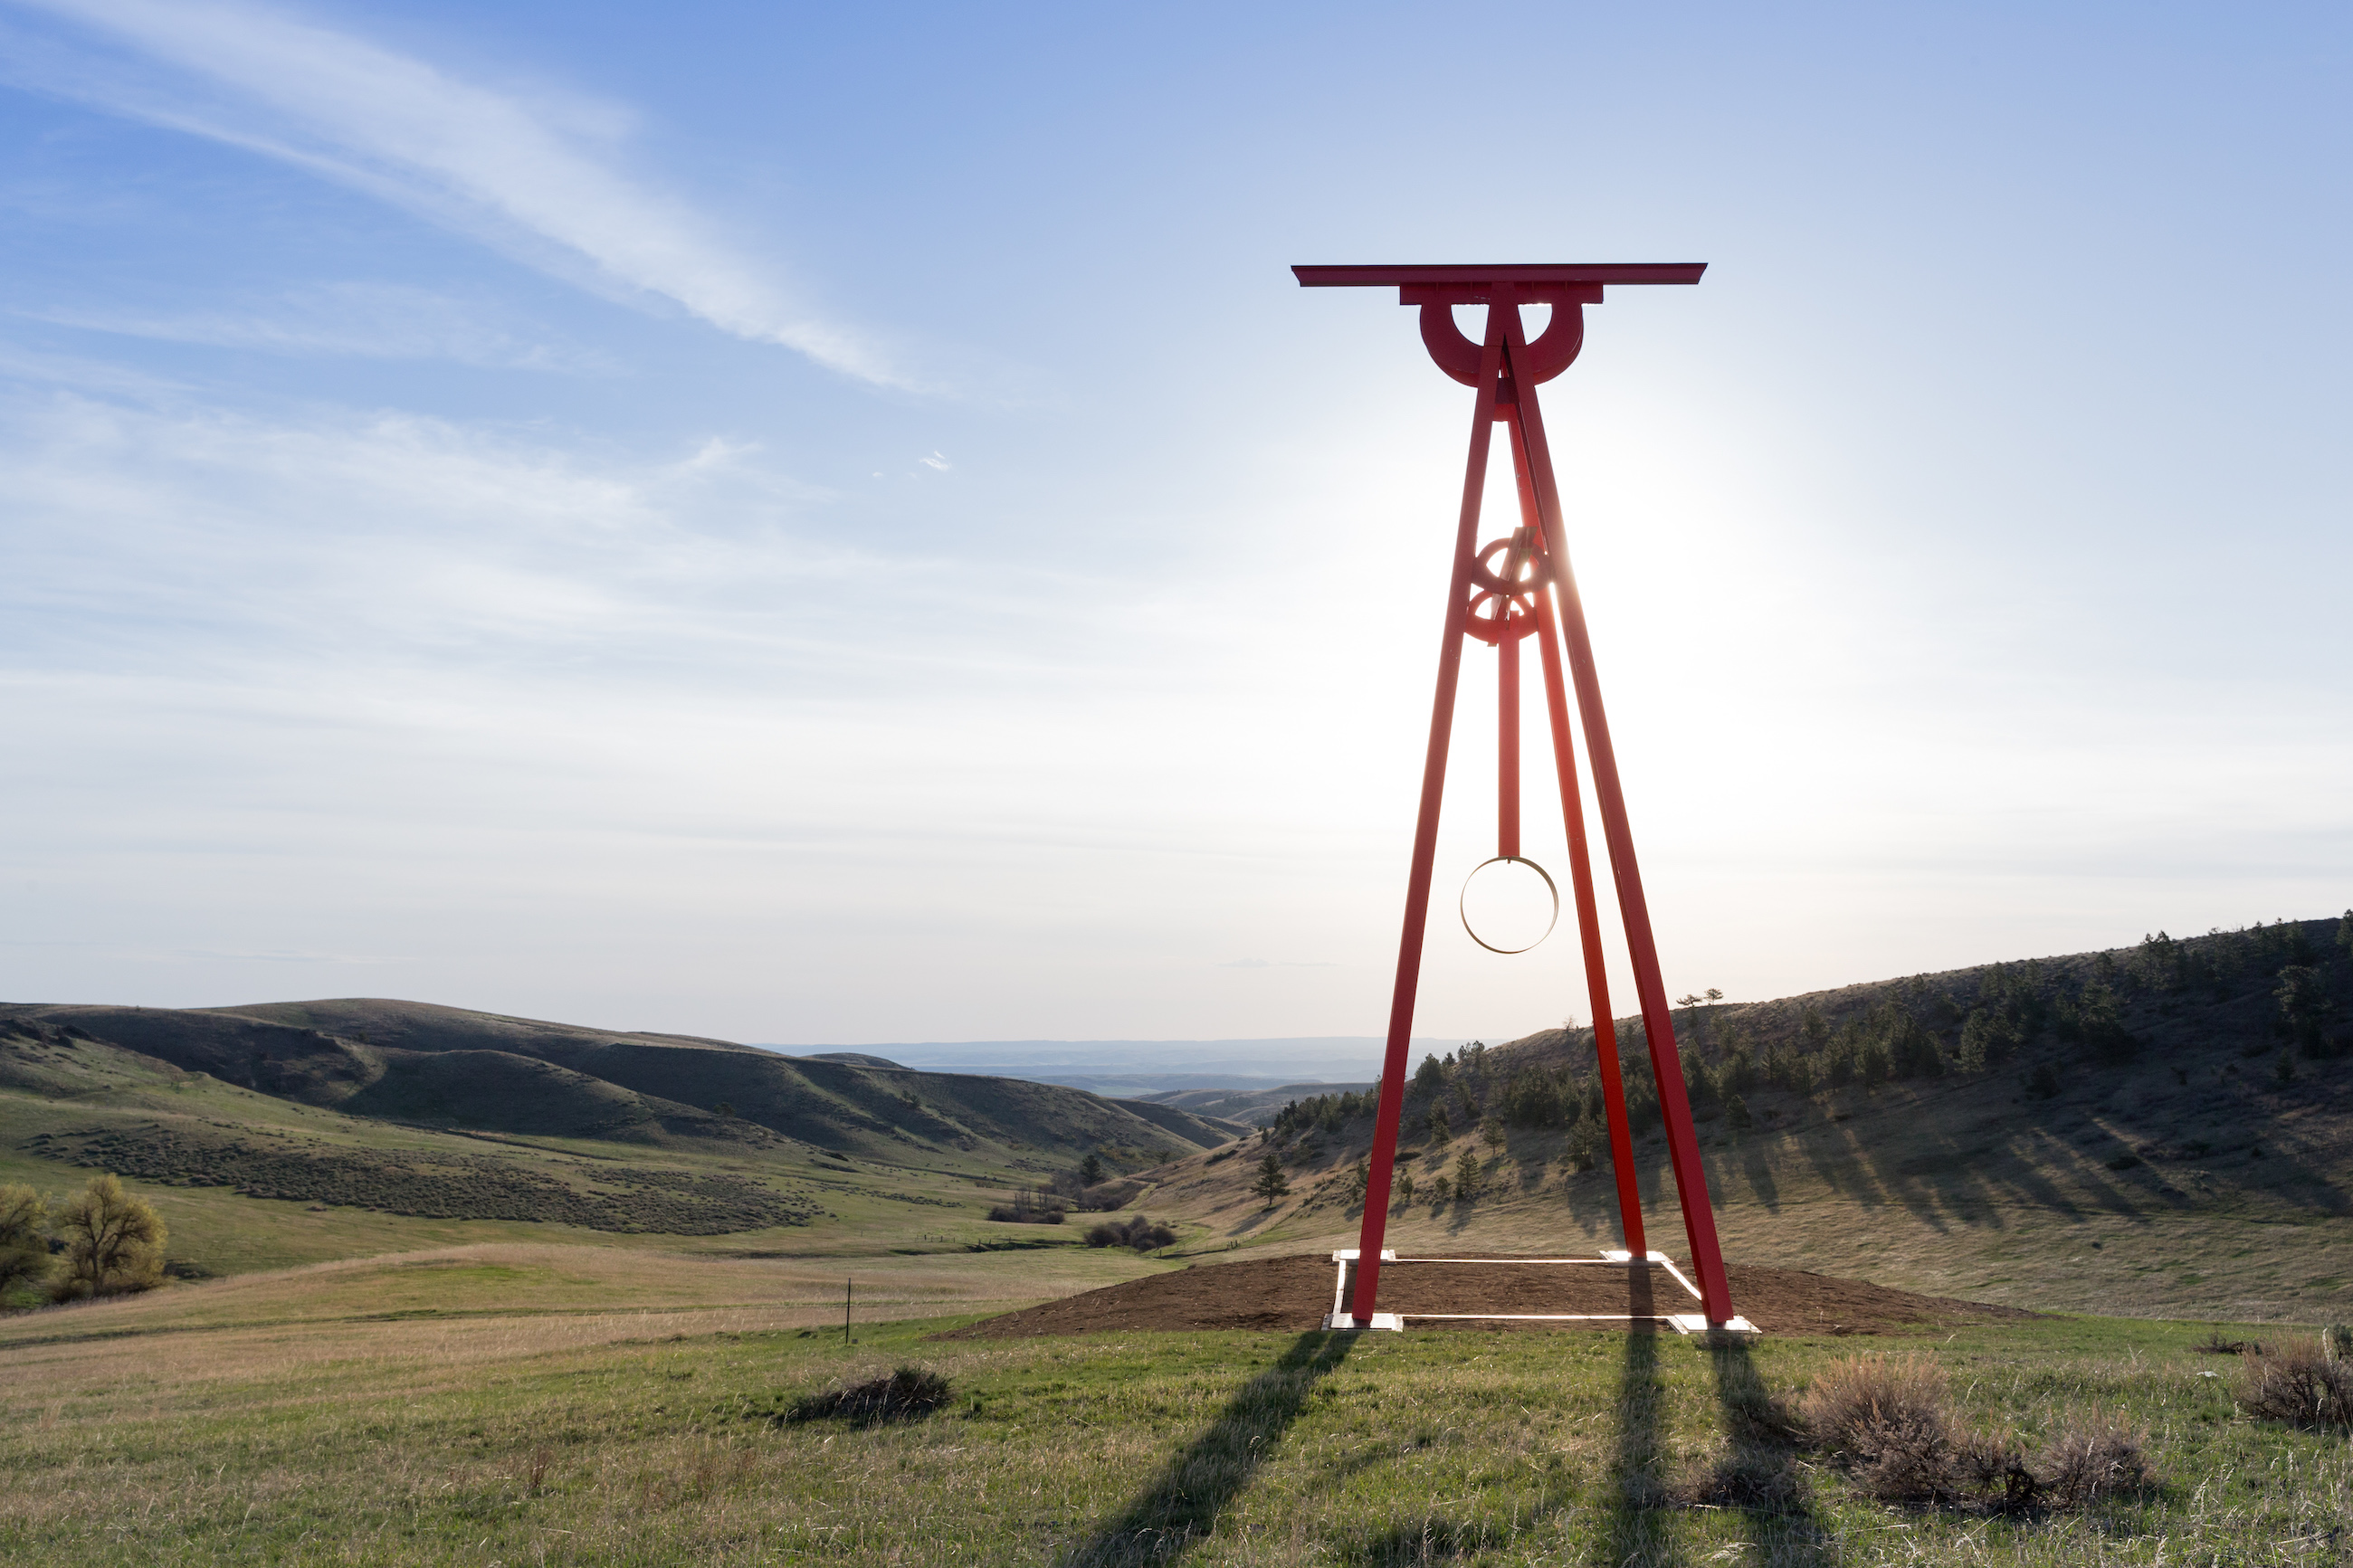 Mark di Suvero, 'Proverb,' 2002. Image courtesy of Tippet Rise Art Center/Iwan Baan. Photo by Iwan Baan. 